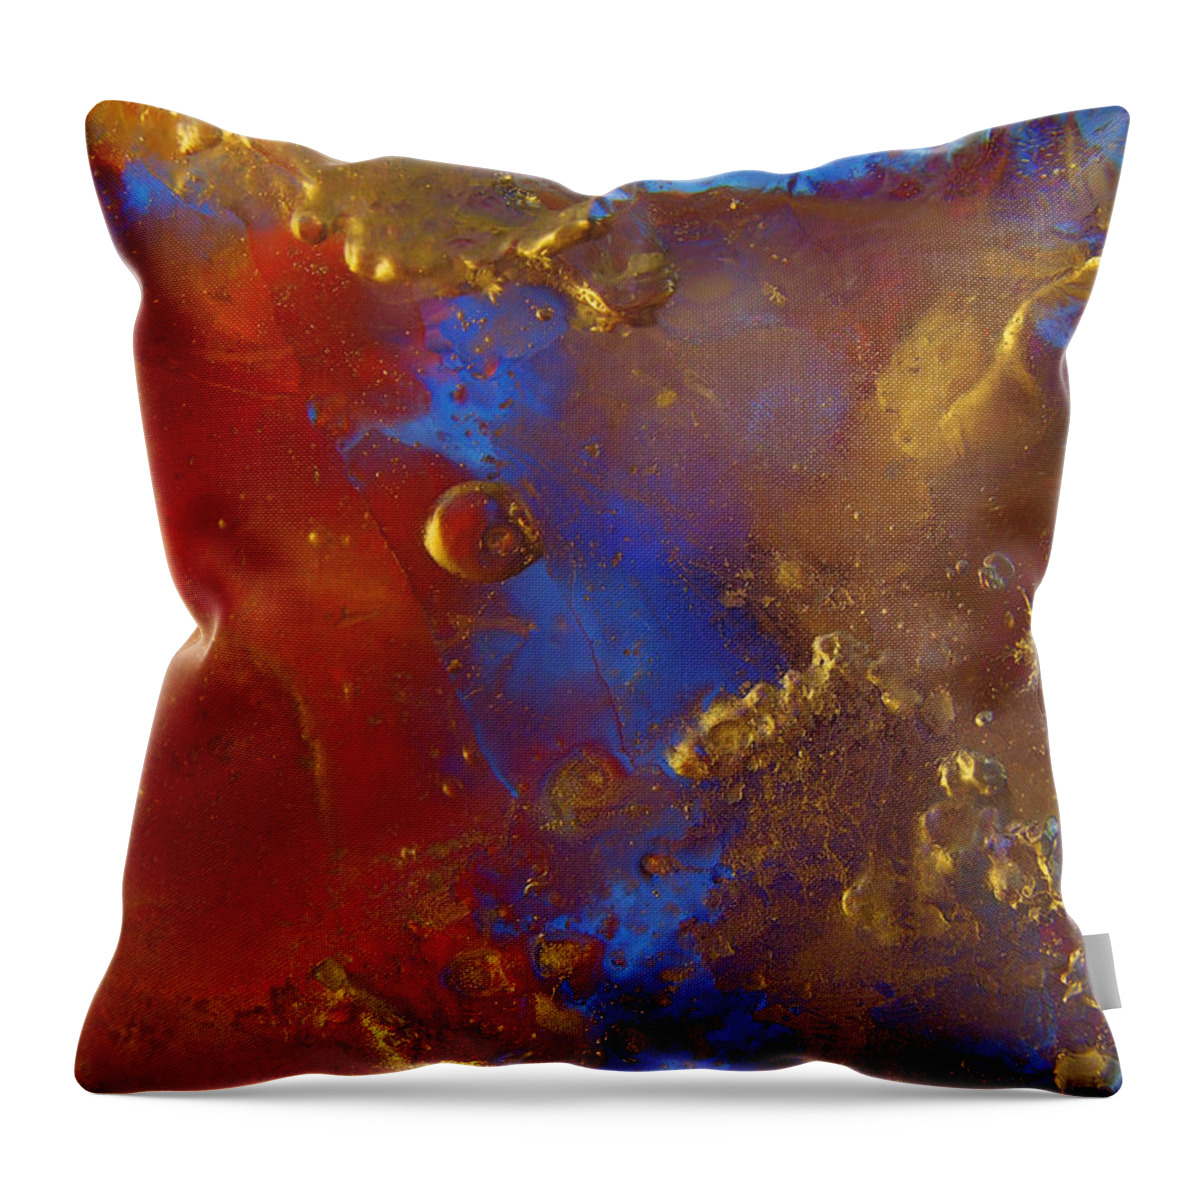 Rupture Throw Pillow featuring the photograph Rupture by Sami Tiainen